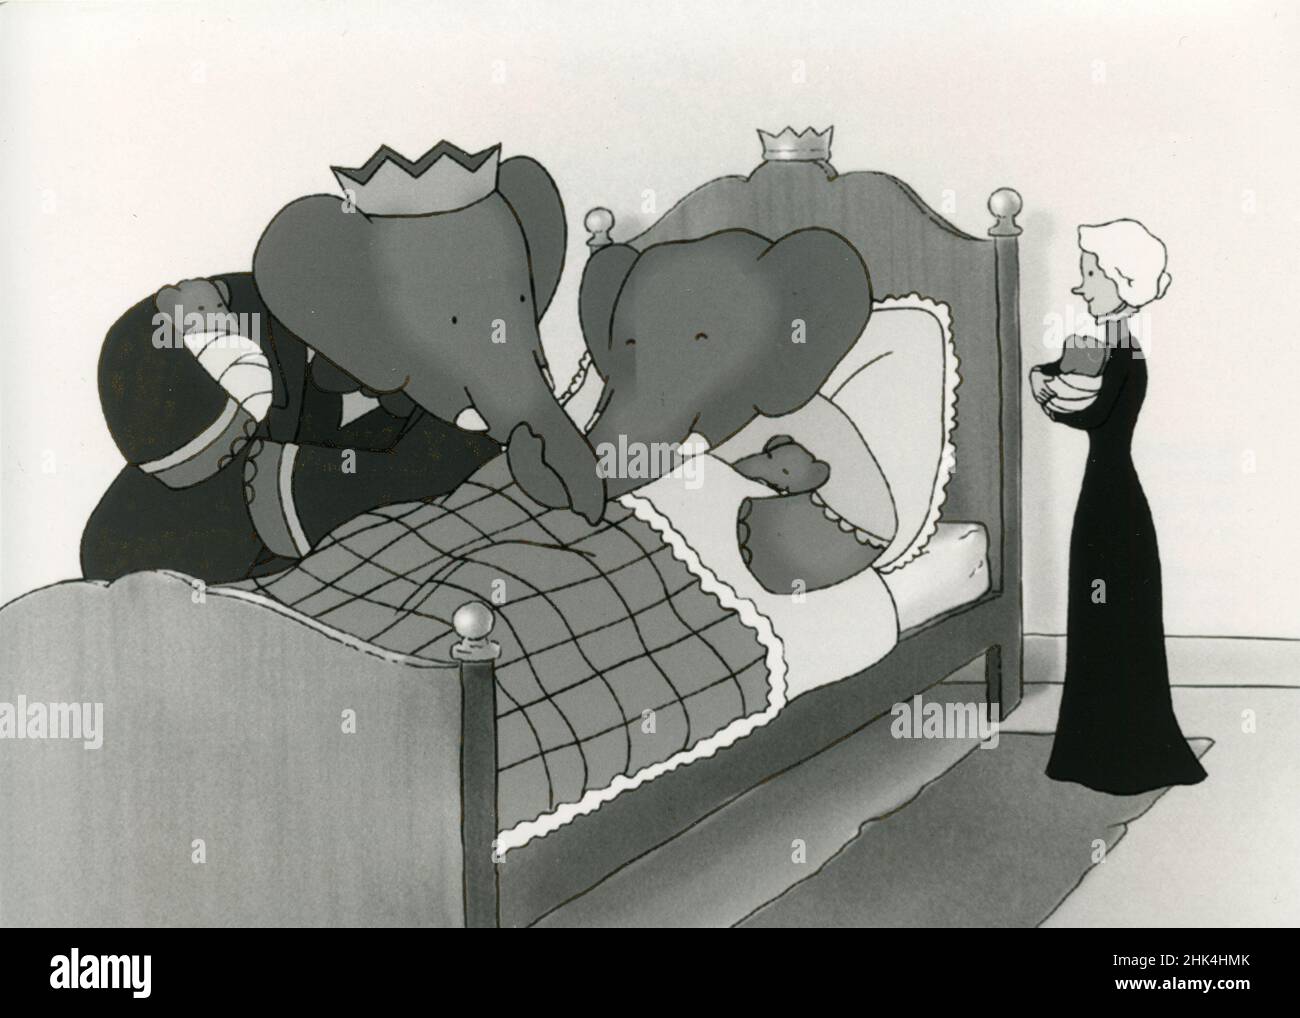 Scene from the animation movie Babar, King of the Elephants, 1999 Stock Photo